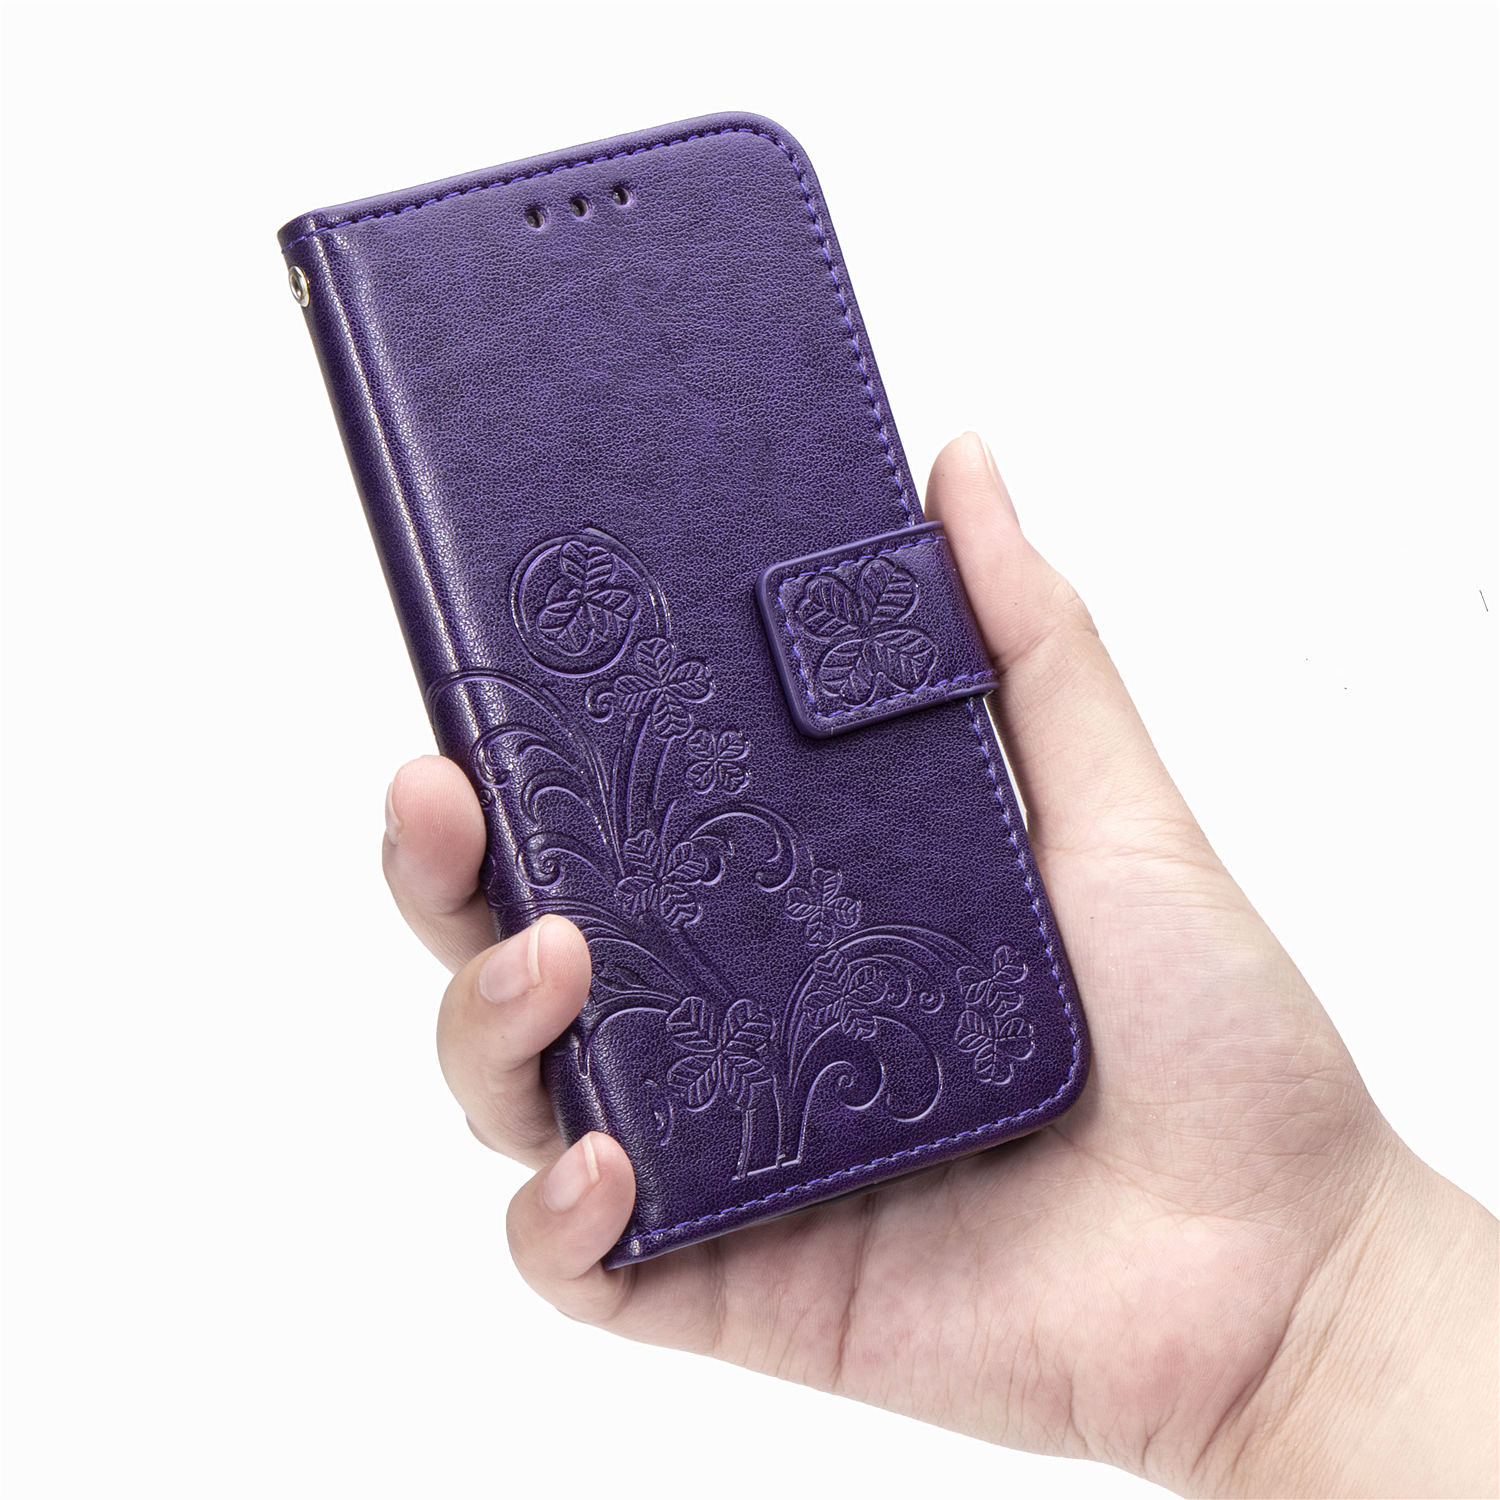 casing Xiaomi Mi POCO X3 Pro NFC 10T LITE Poco M3 PU Phone case four leaf clover flower Bumper Flip Leather Protective Support Cover Magnetic Wallet card slot blue pink gray purple red